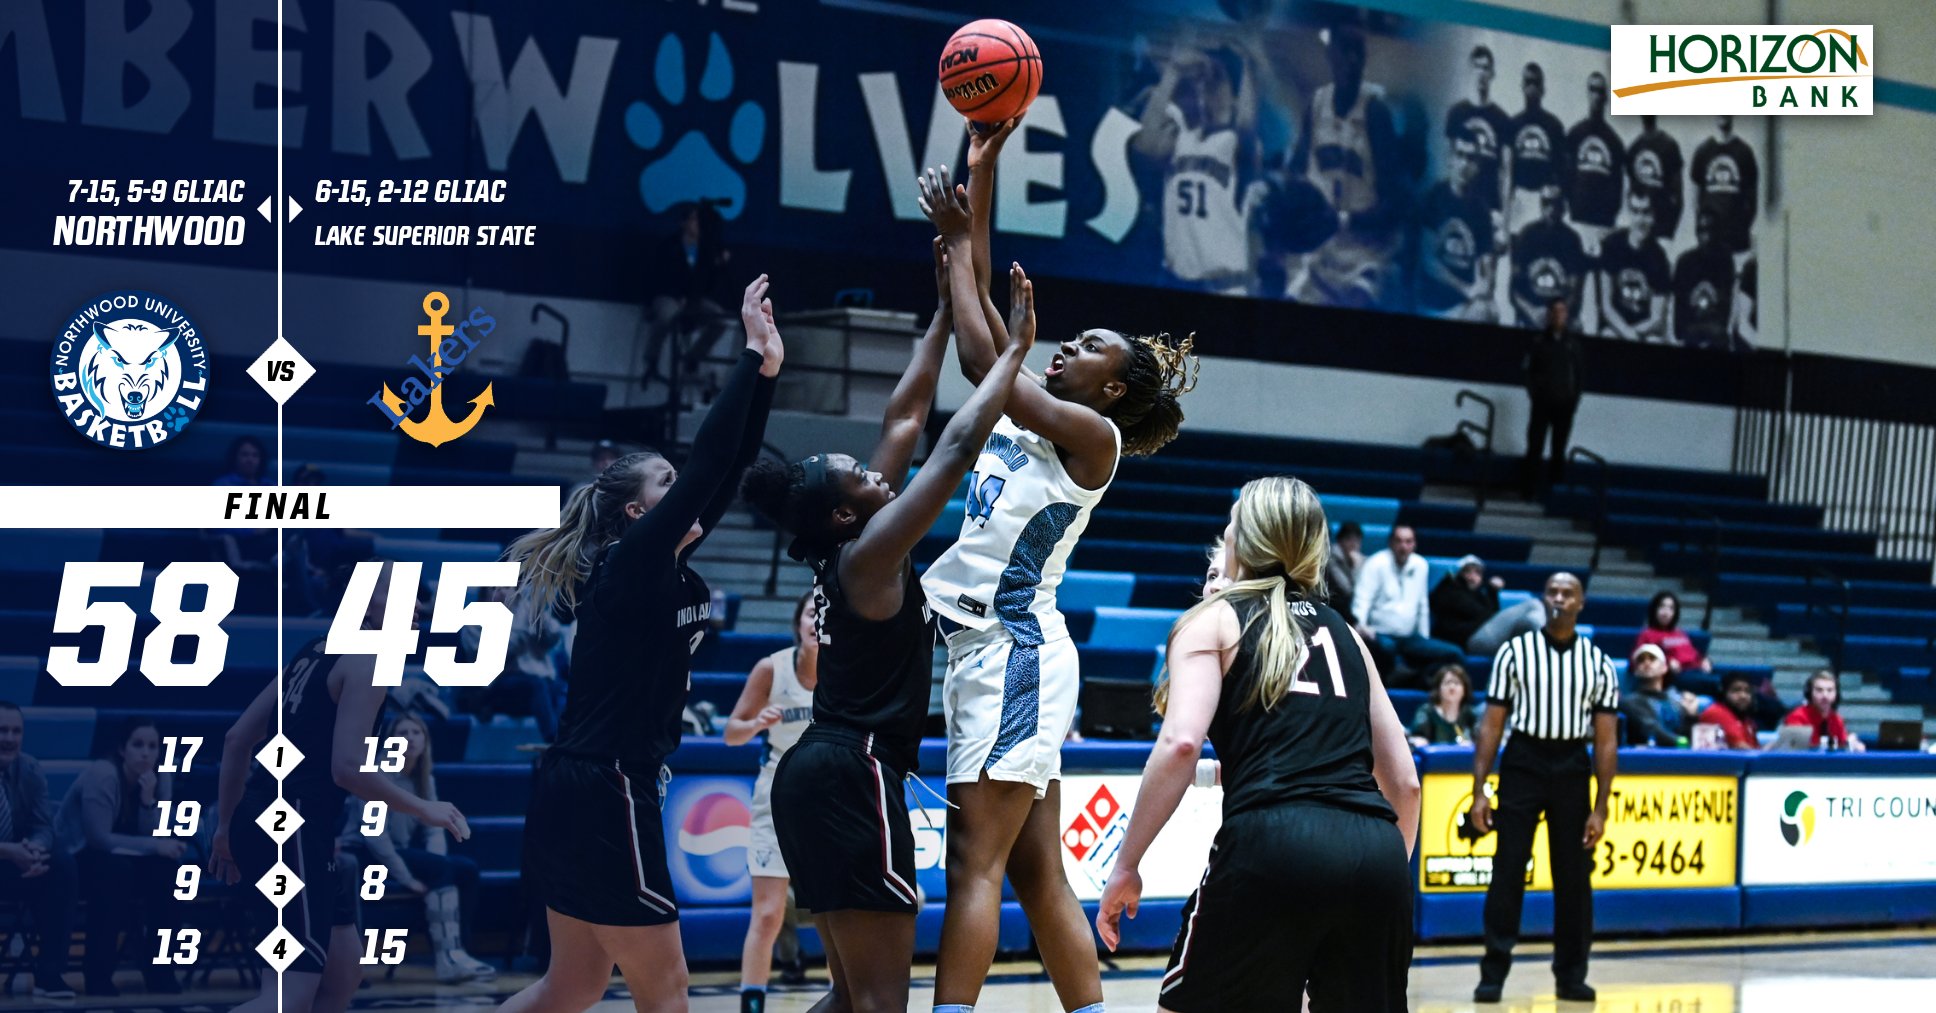 Women's Basketball Wins Third Straight - Defeats Lake Superior State 58-45